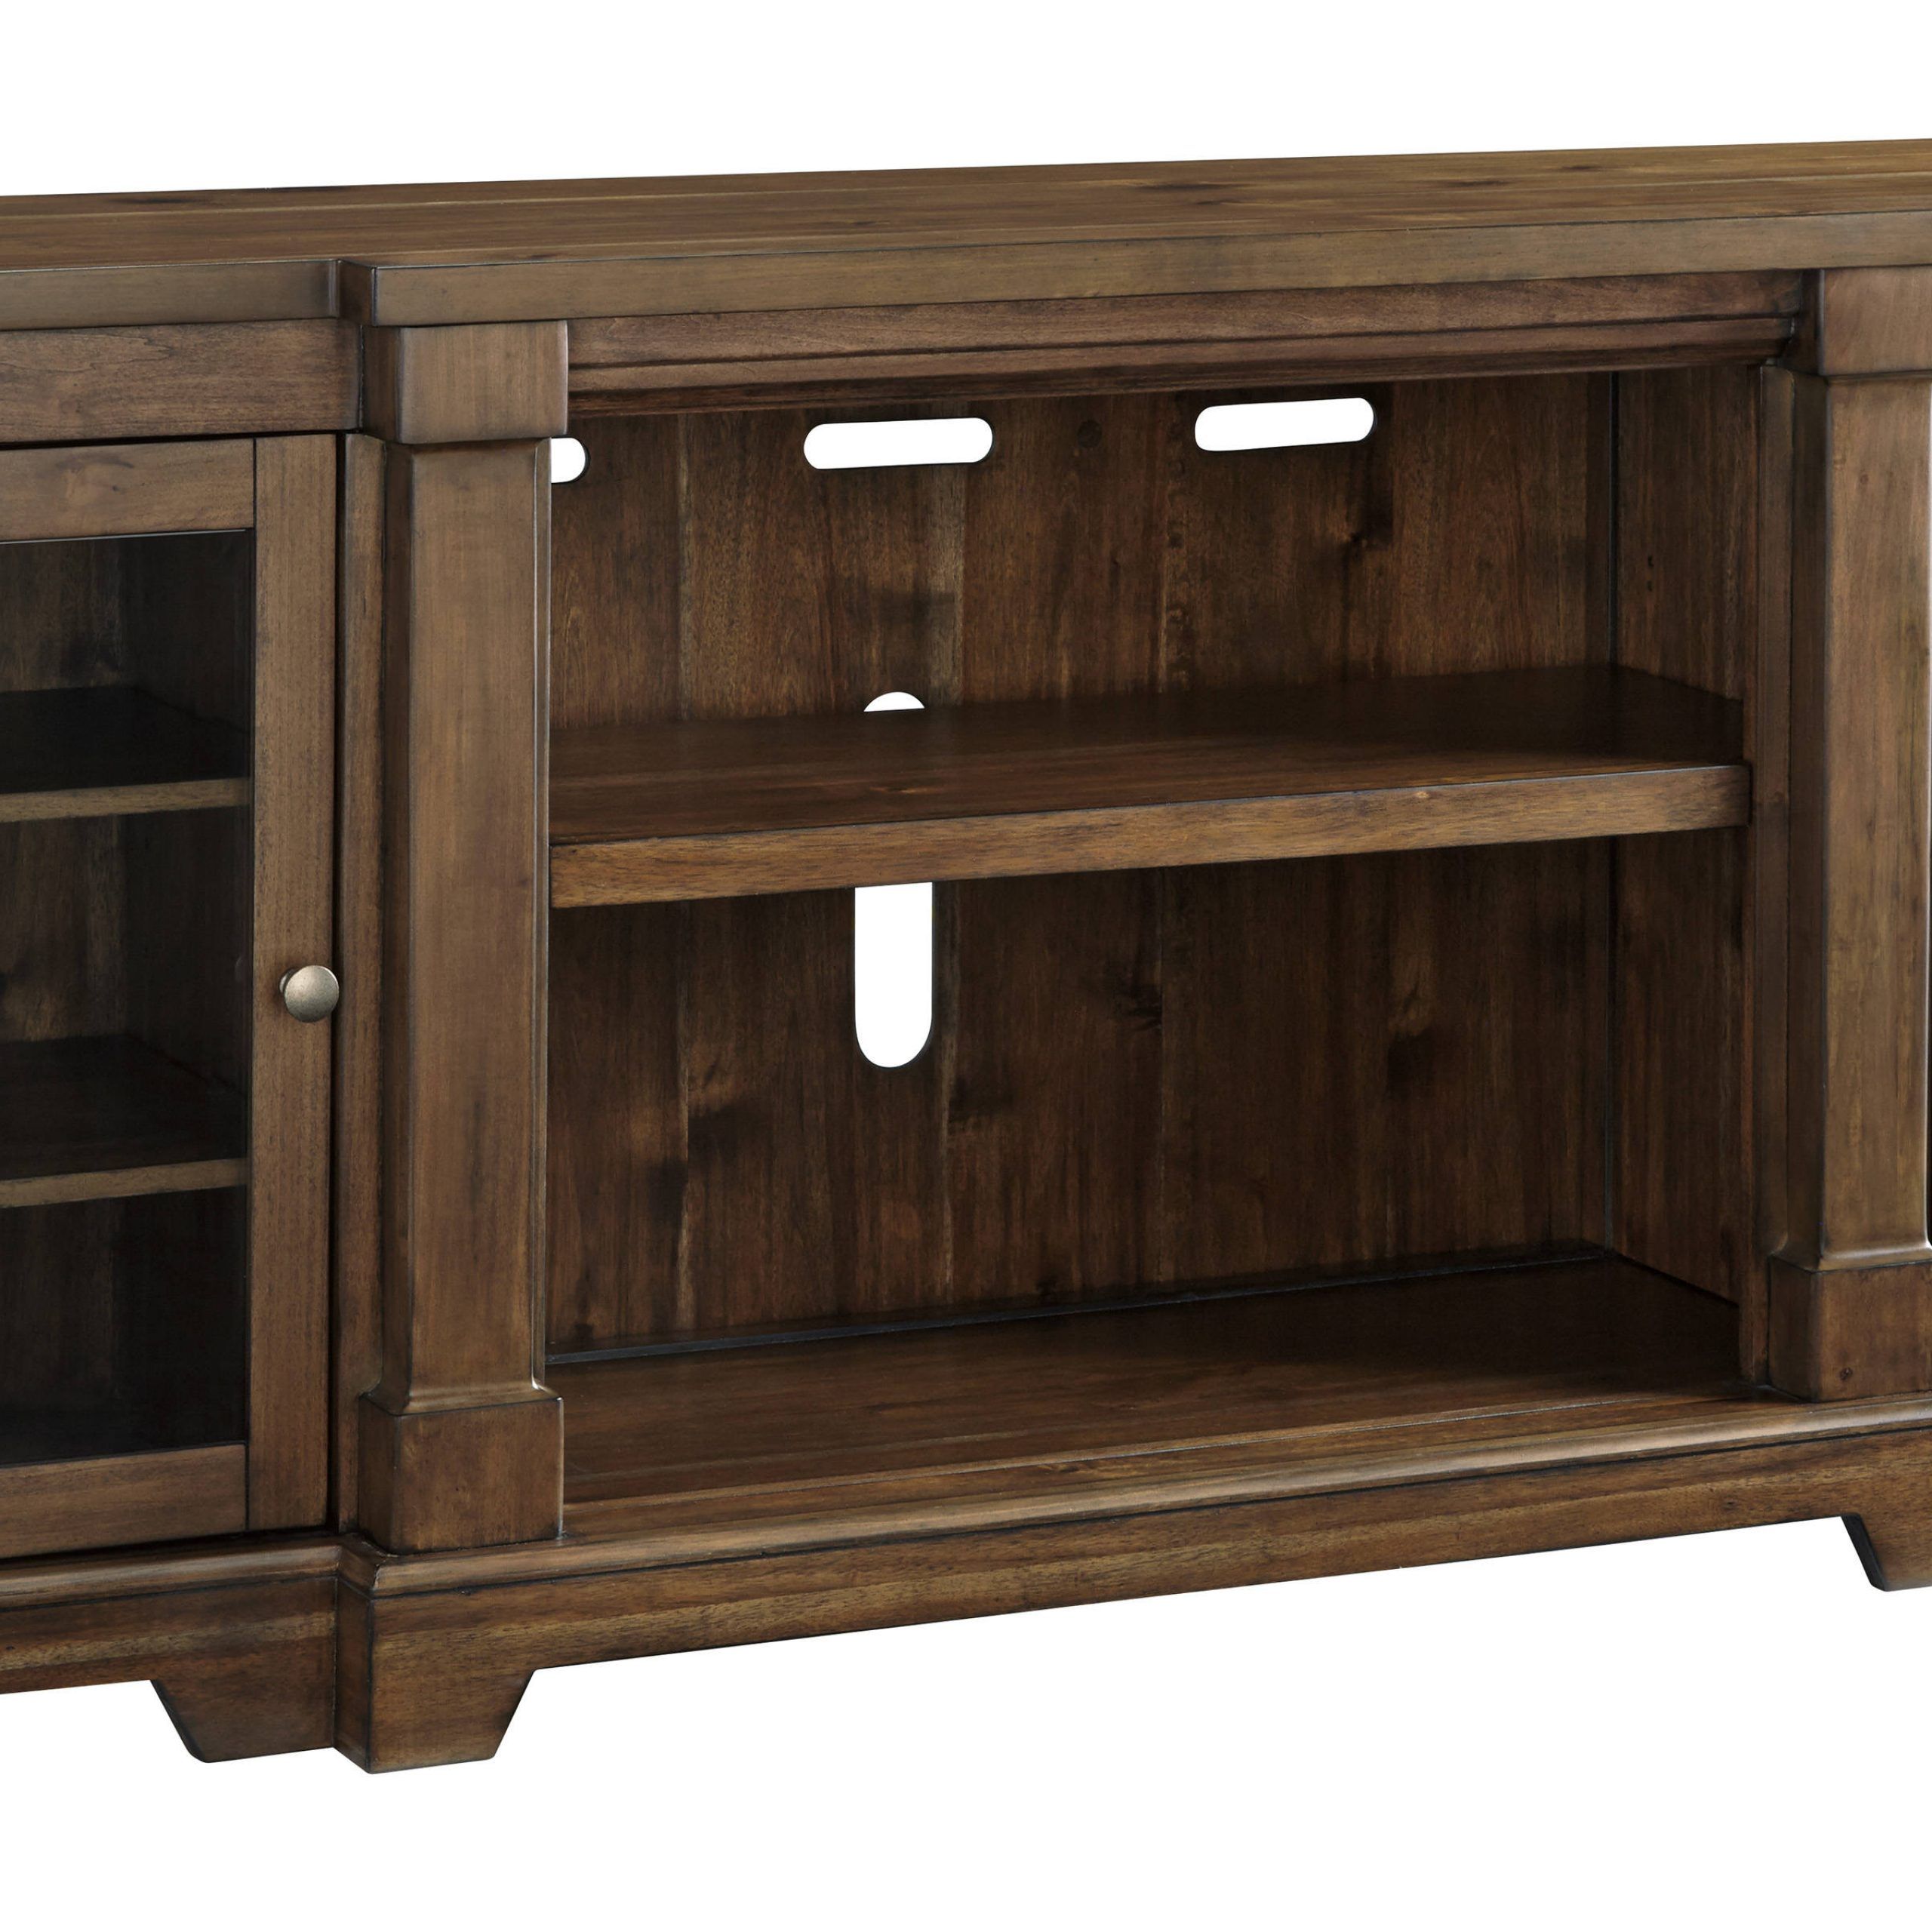 Ashley Furniture Flynnter Xl Tv Stand | The Classy Home For Classy Tv Stands (View 11 of 15)